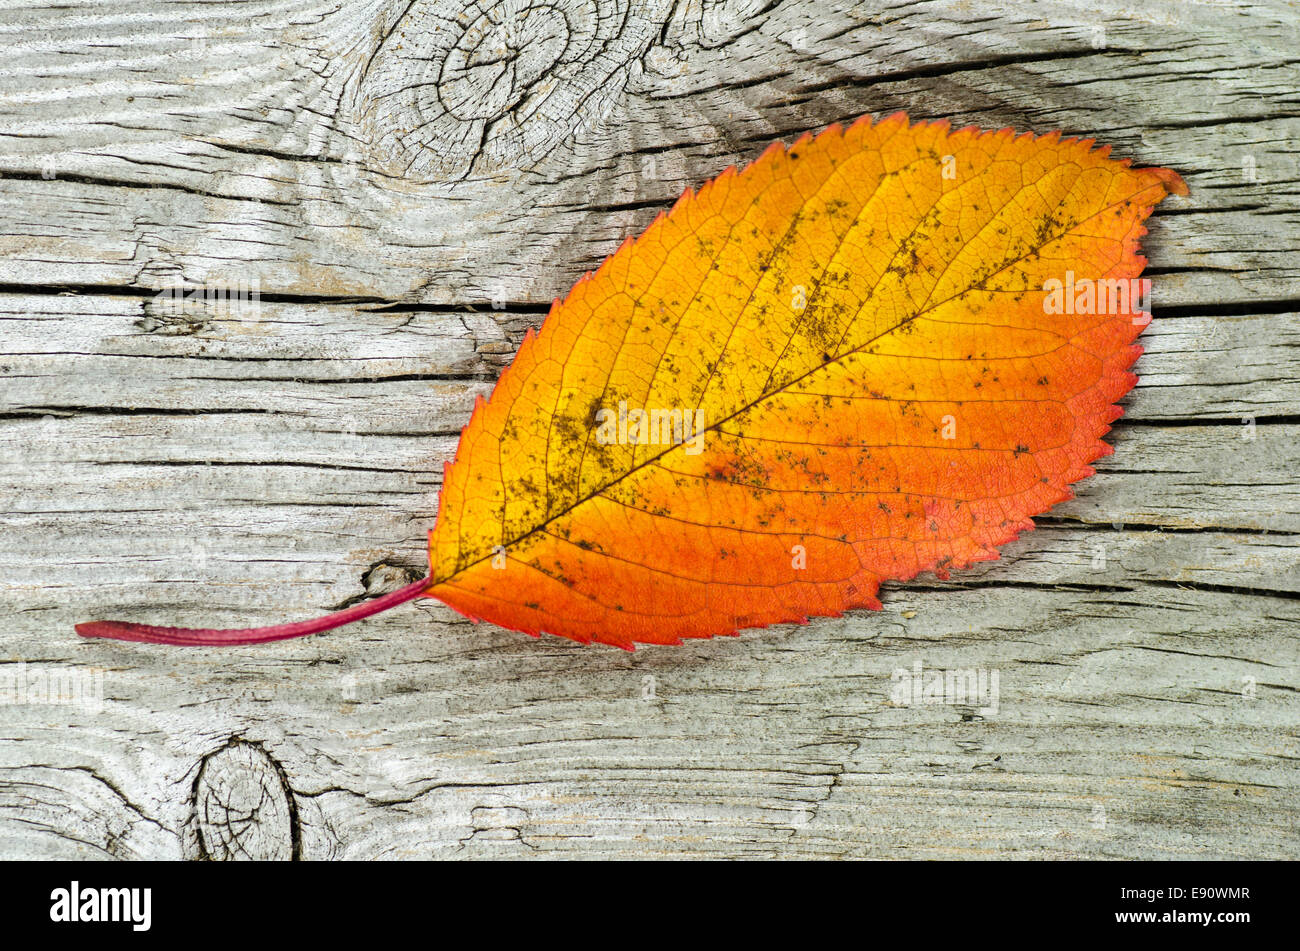 Single autumn colored leaf at an old weathered wooden surface Stock Photo